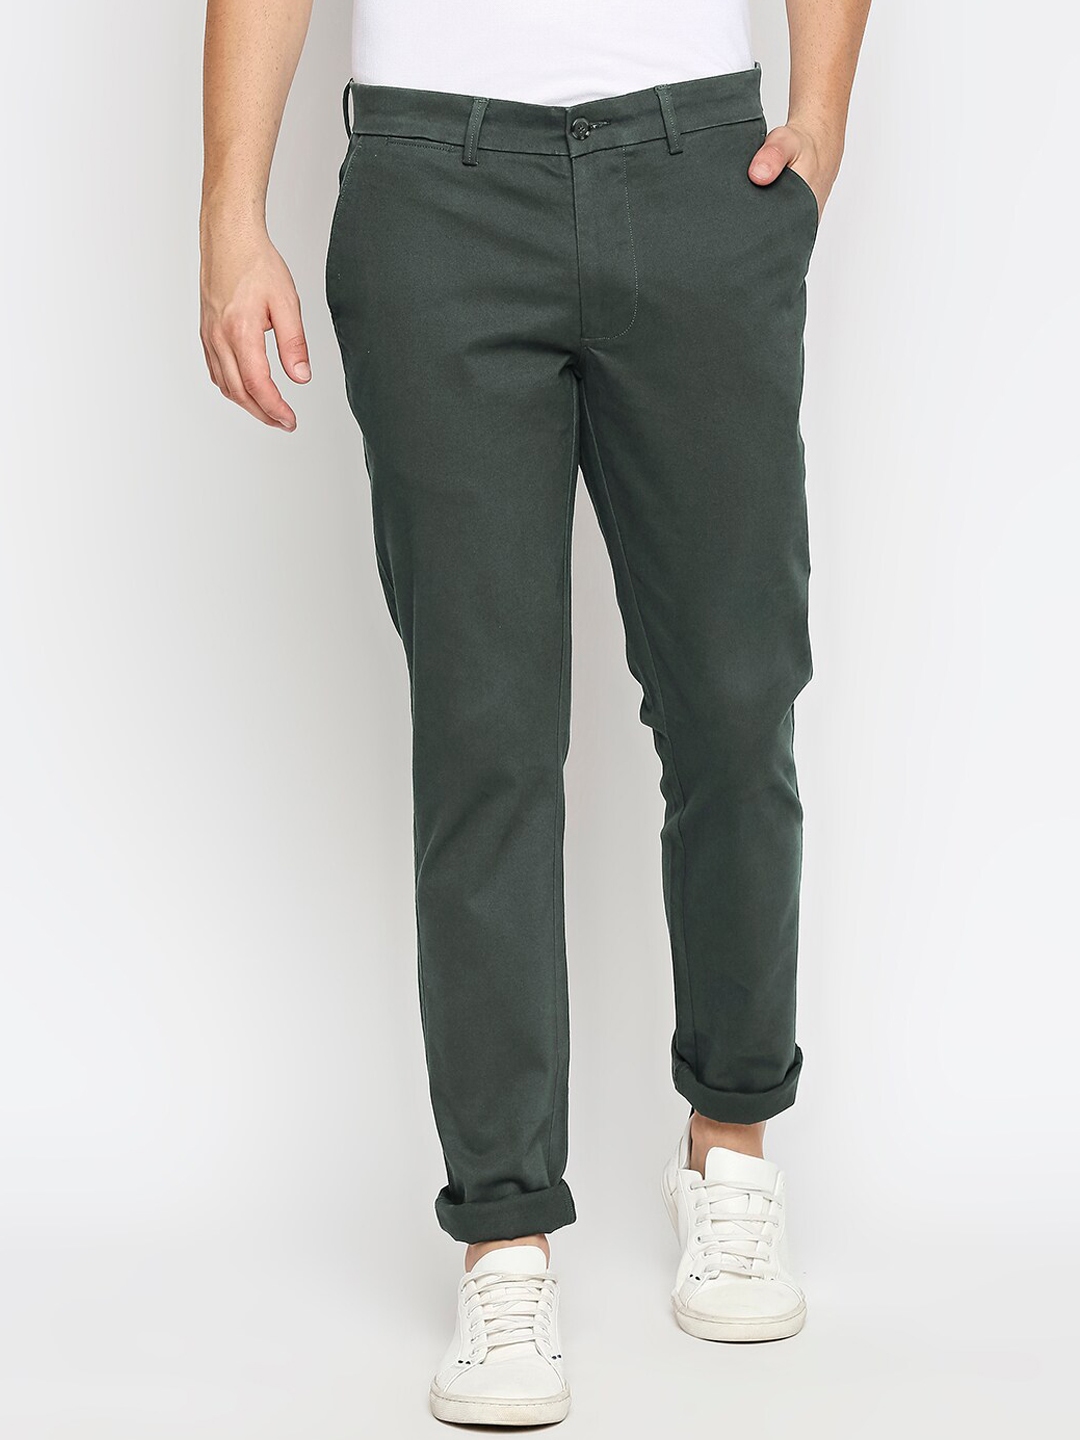 Buy Basics Men Olive Green Tapered Fit Trousers - Trousers for Men ...